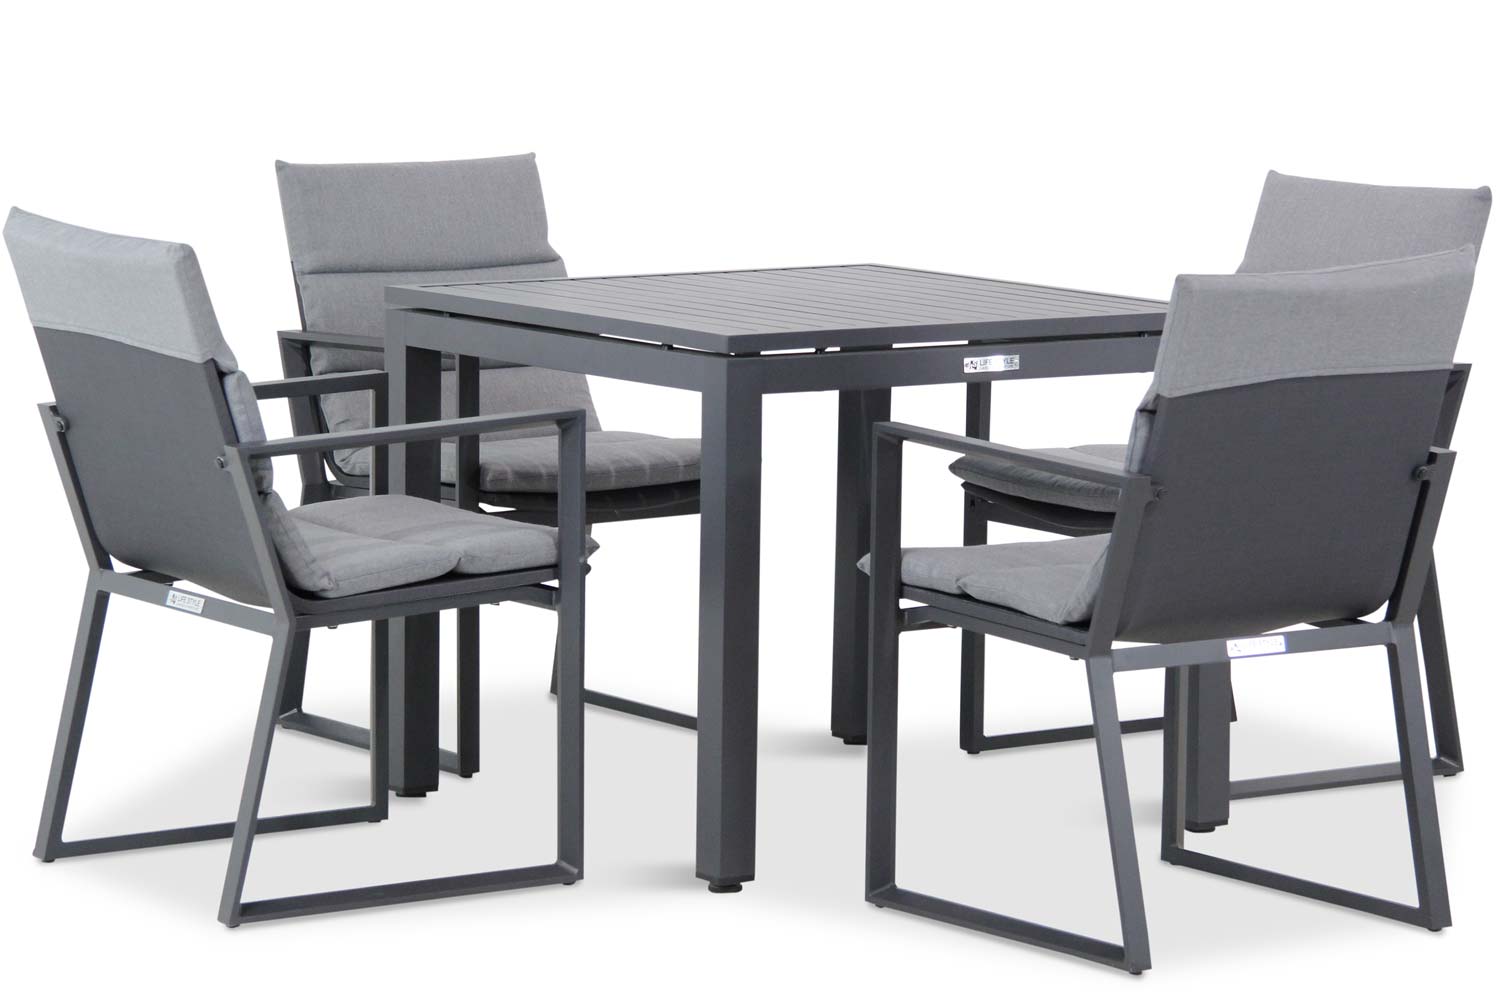 treviso tuinset antracite 5d concept 2  - Lifestyle Treviso/Concept 90 cm dining tuinset 5-delig